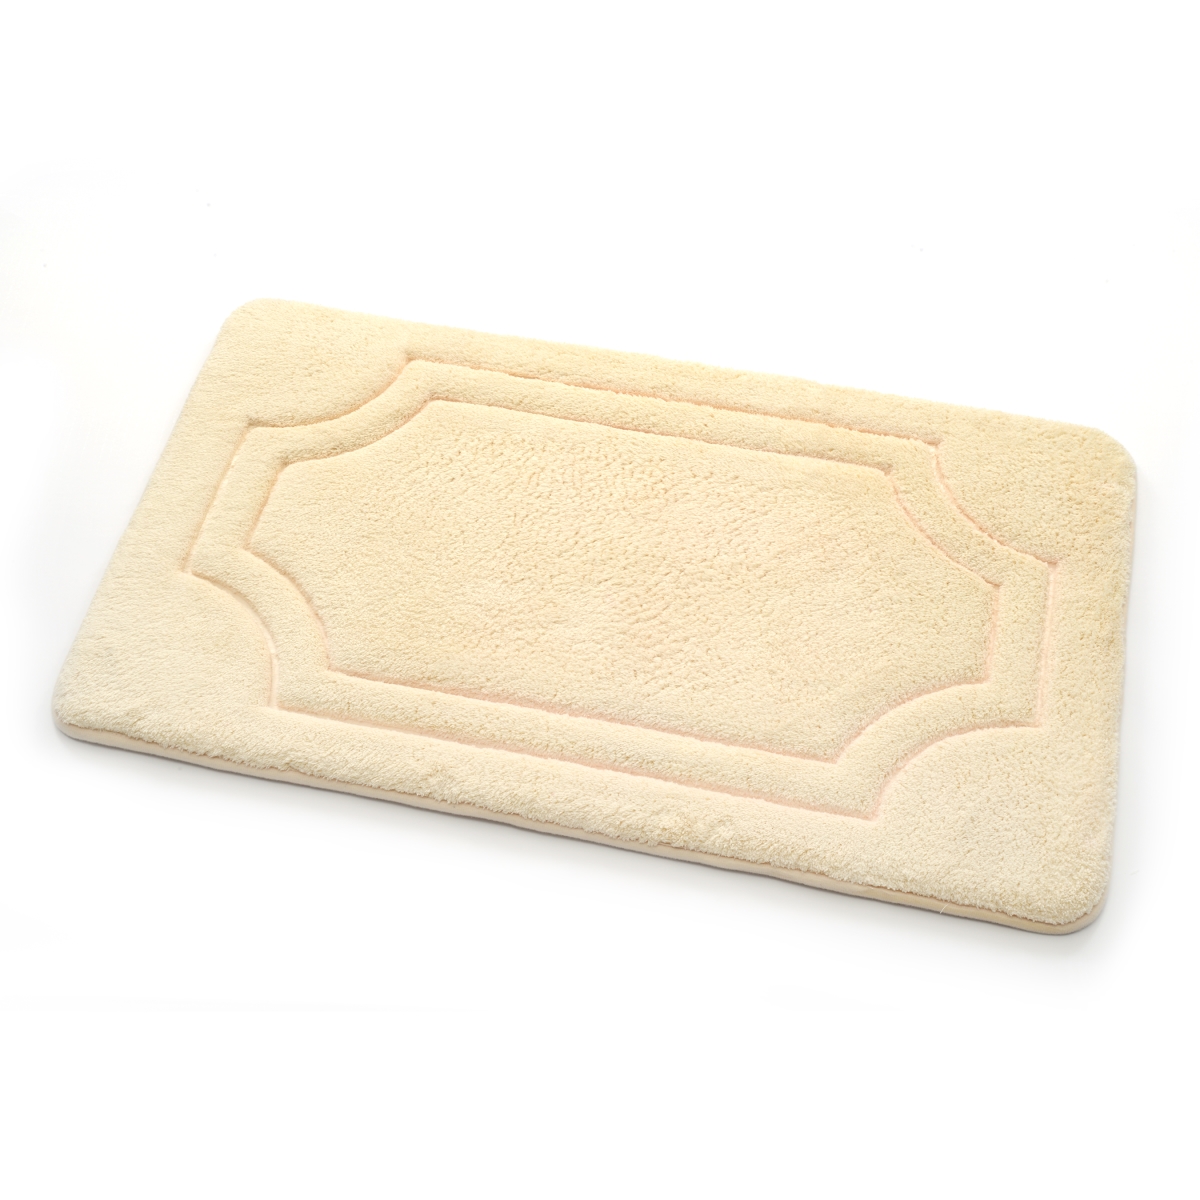 Bfdm-24c763-12 17 X 24 In. Luxurious Memory Foam Bath Mat With Water Shield Technology - Antique White